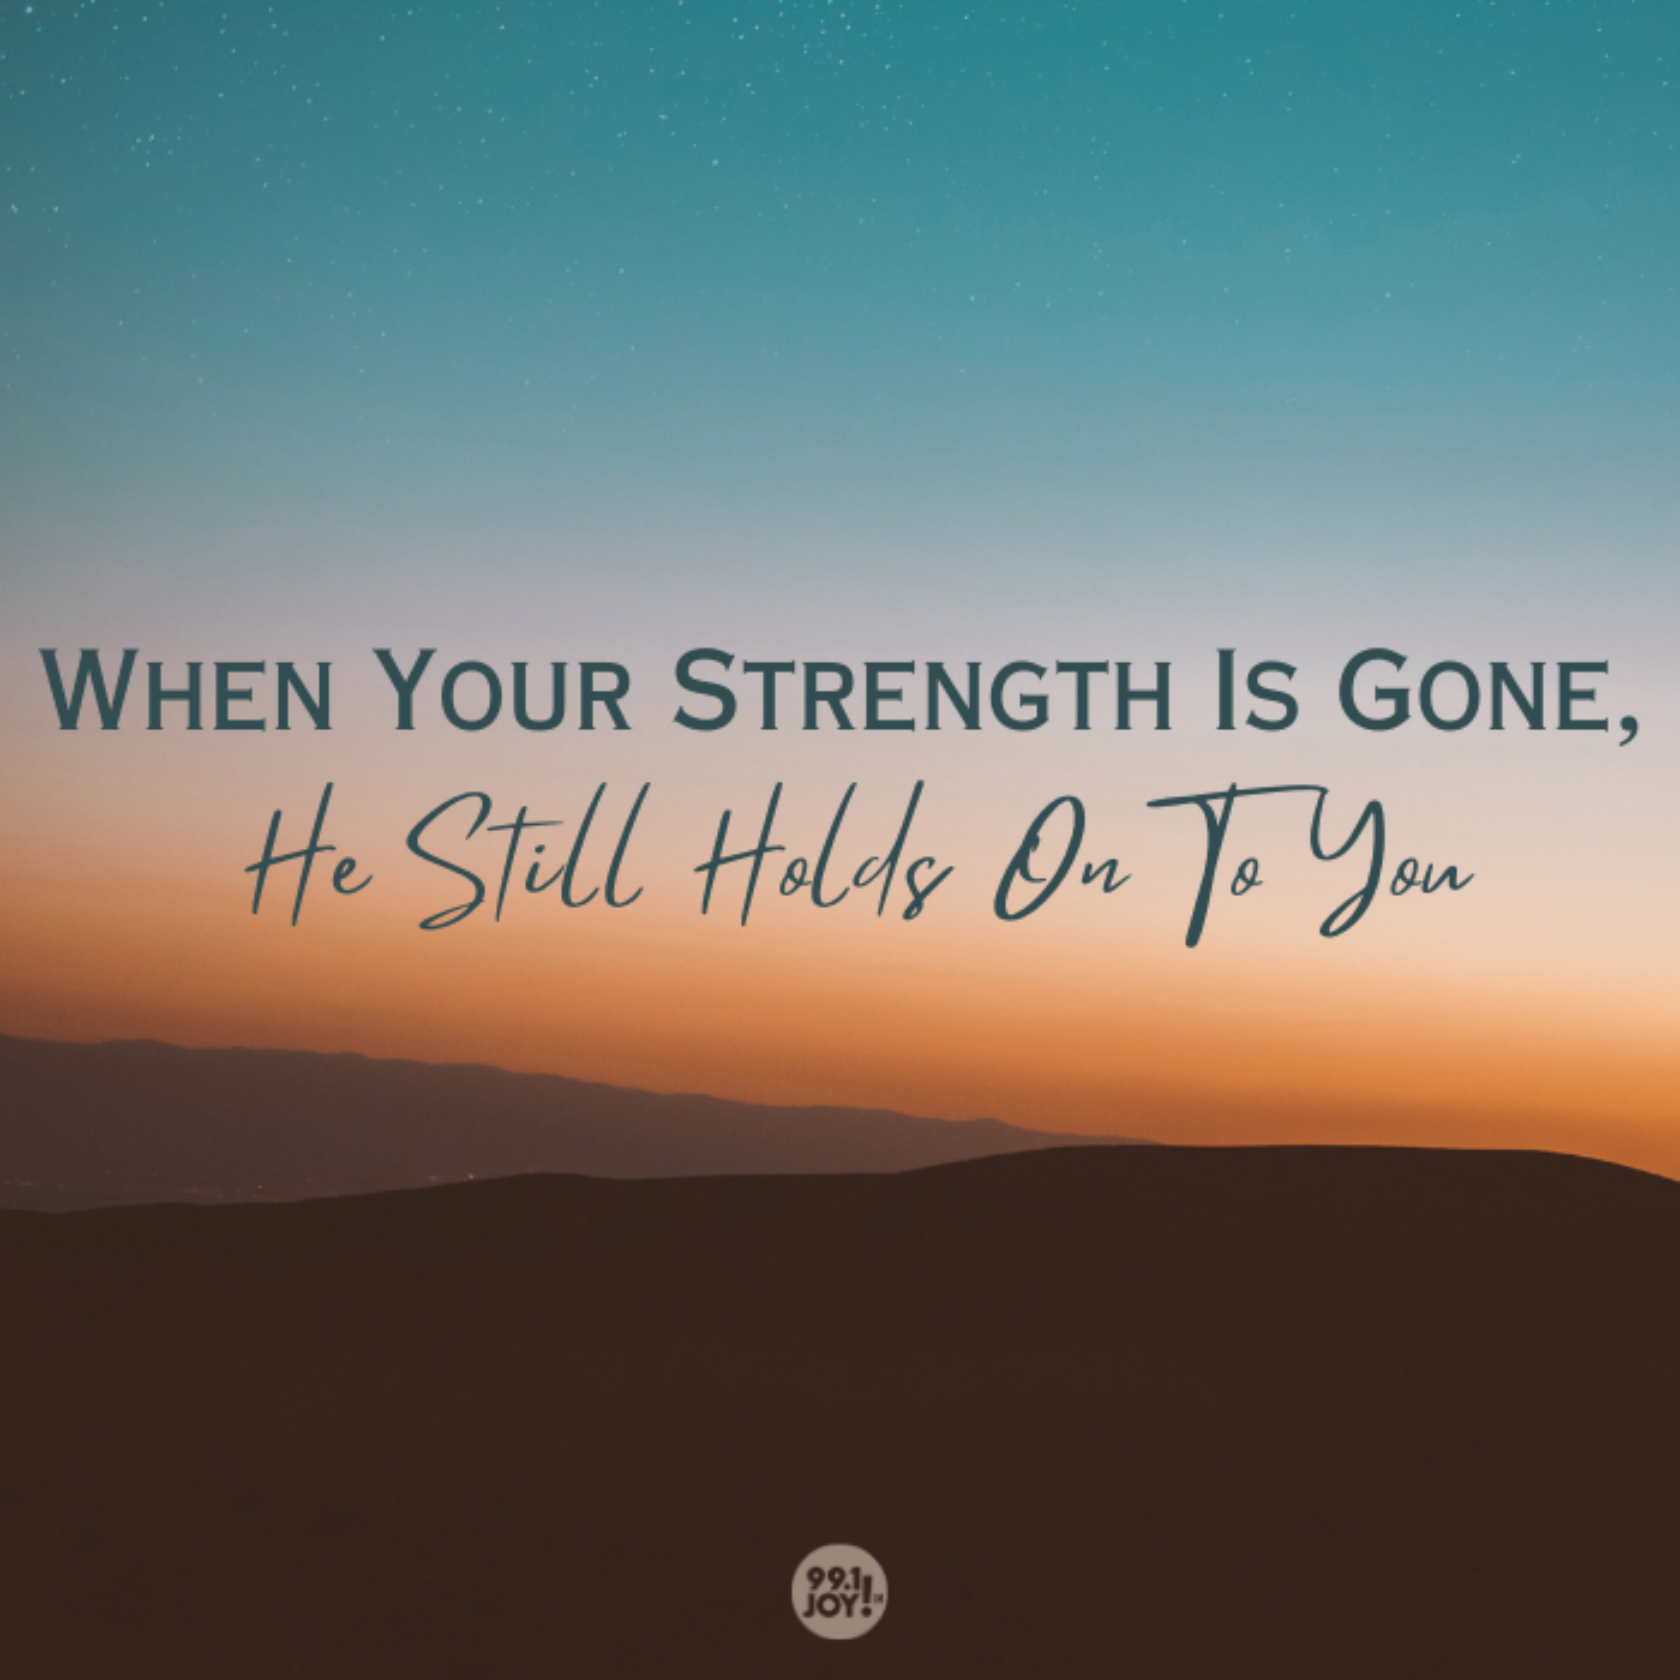 When Your Strength Is Gone, He Still Holds On To You